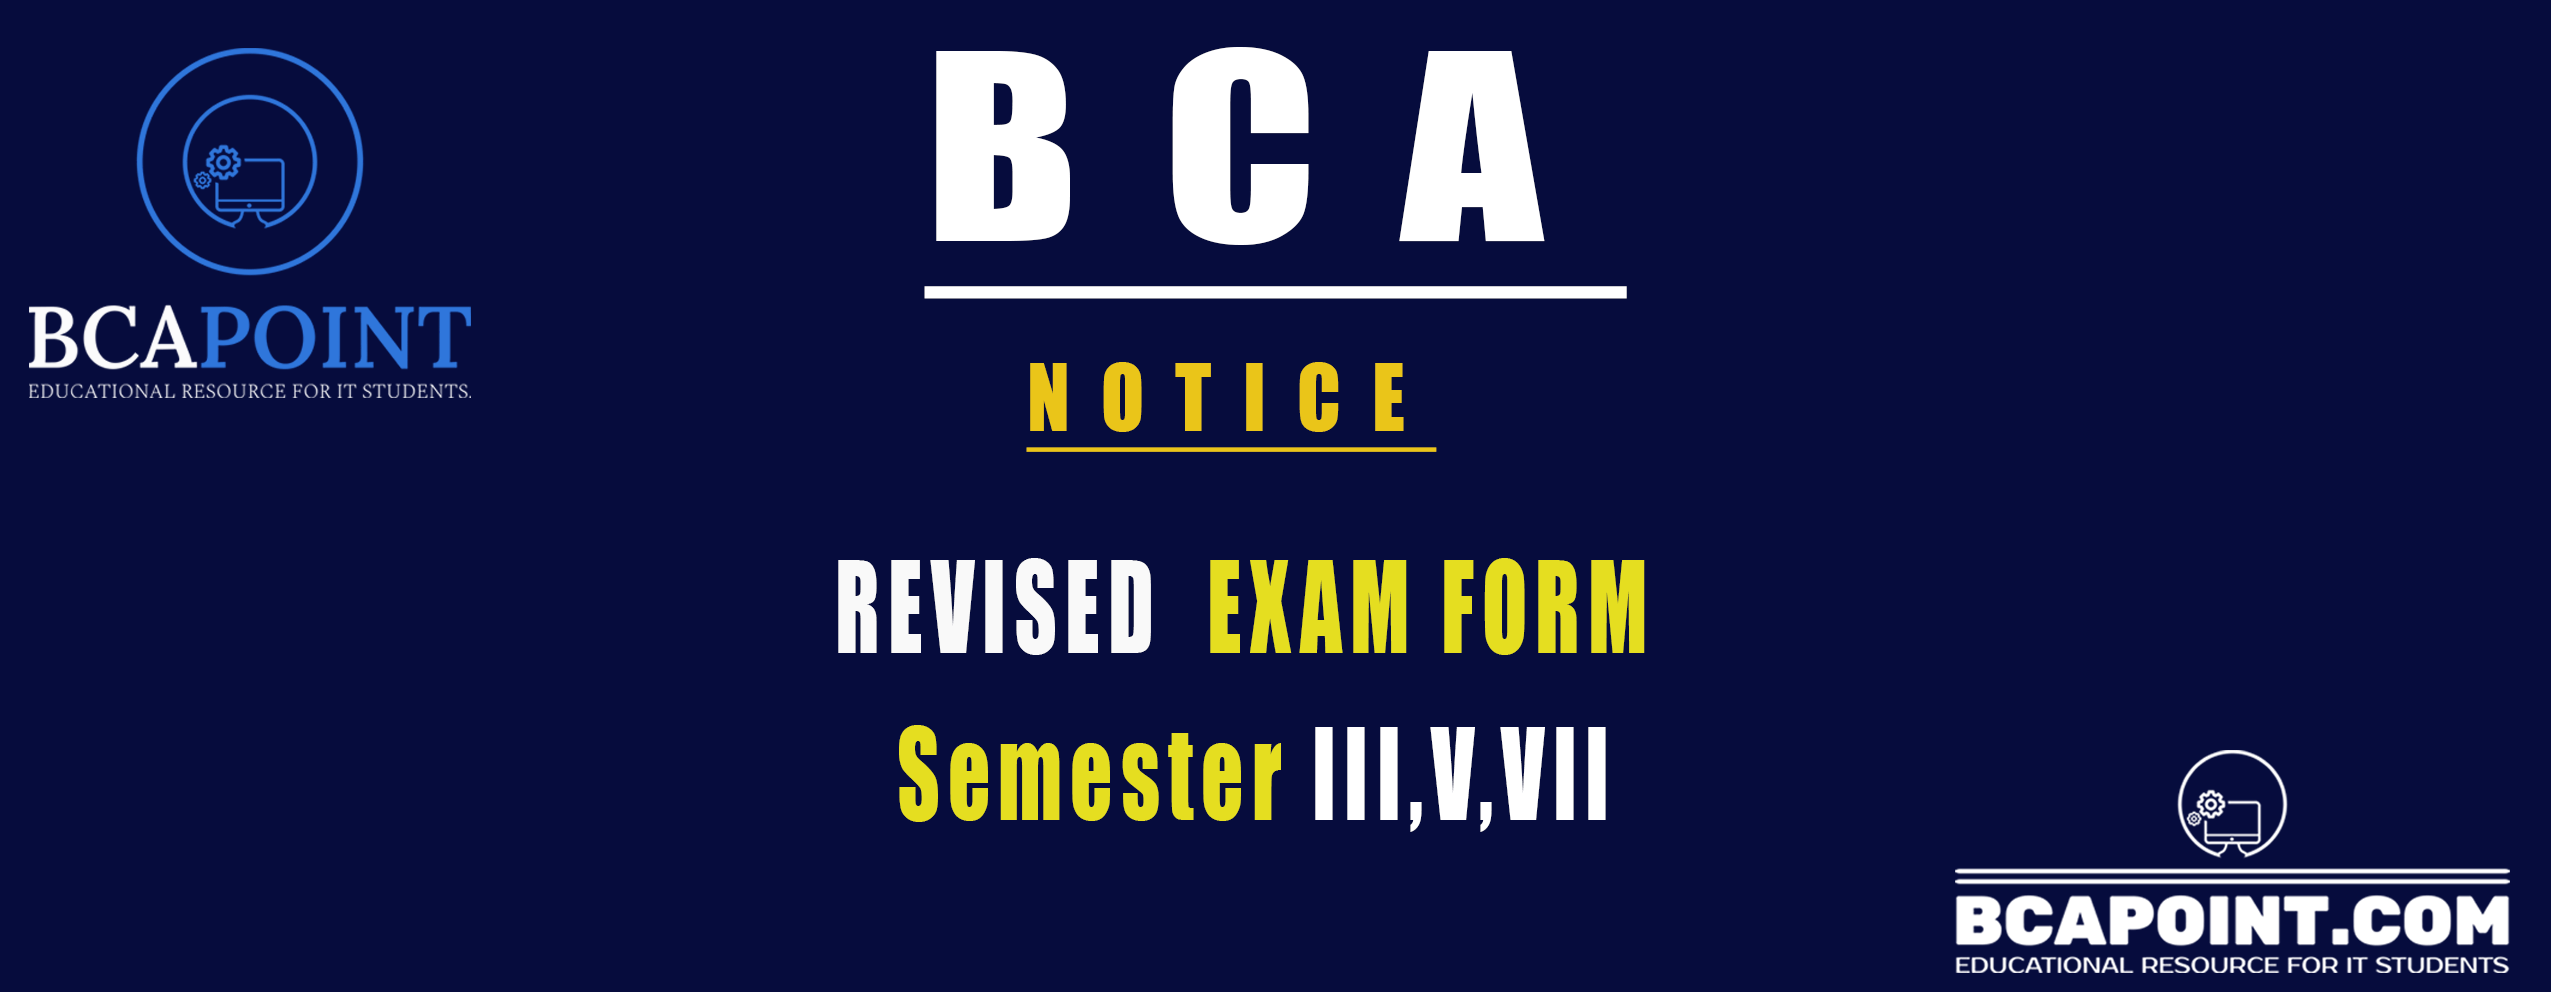 You are currently viewing Revised exam form for BCA 3rd, 5th, and 7th semesters.